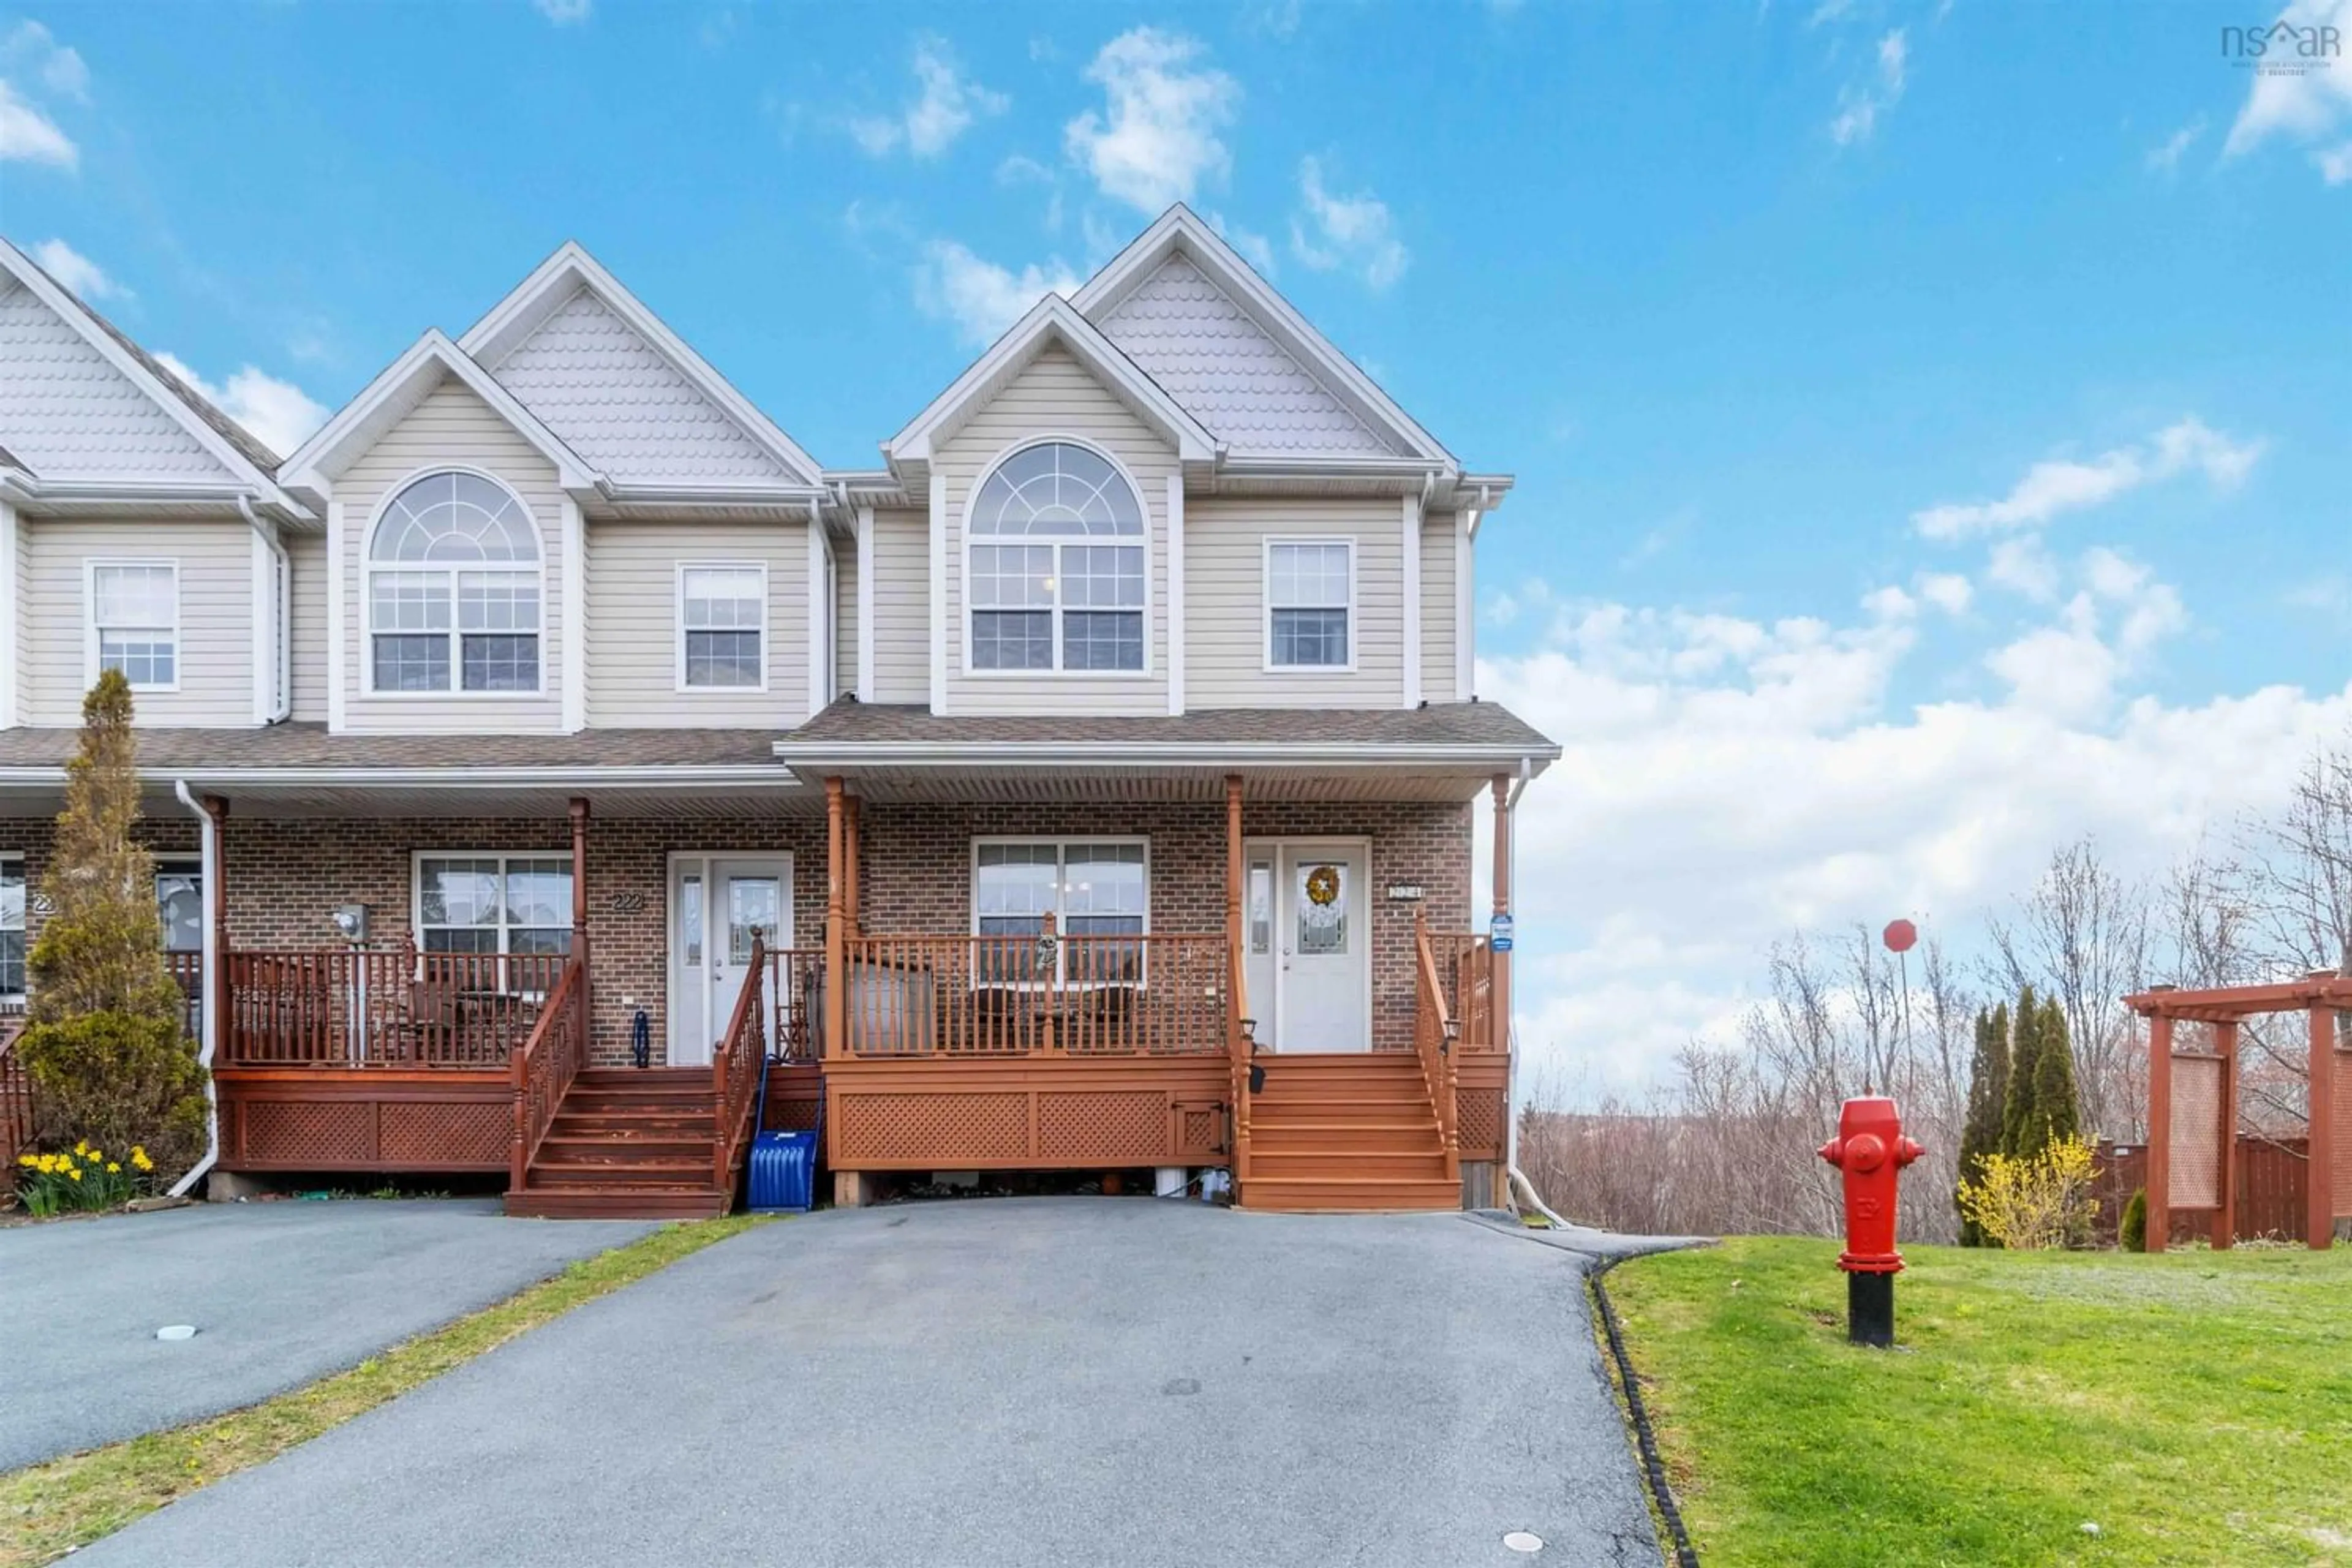 Frontside or backside of a home for 224 Green Village Lane, Dartmouth Nova Scotia B2Y 4B4